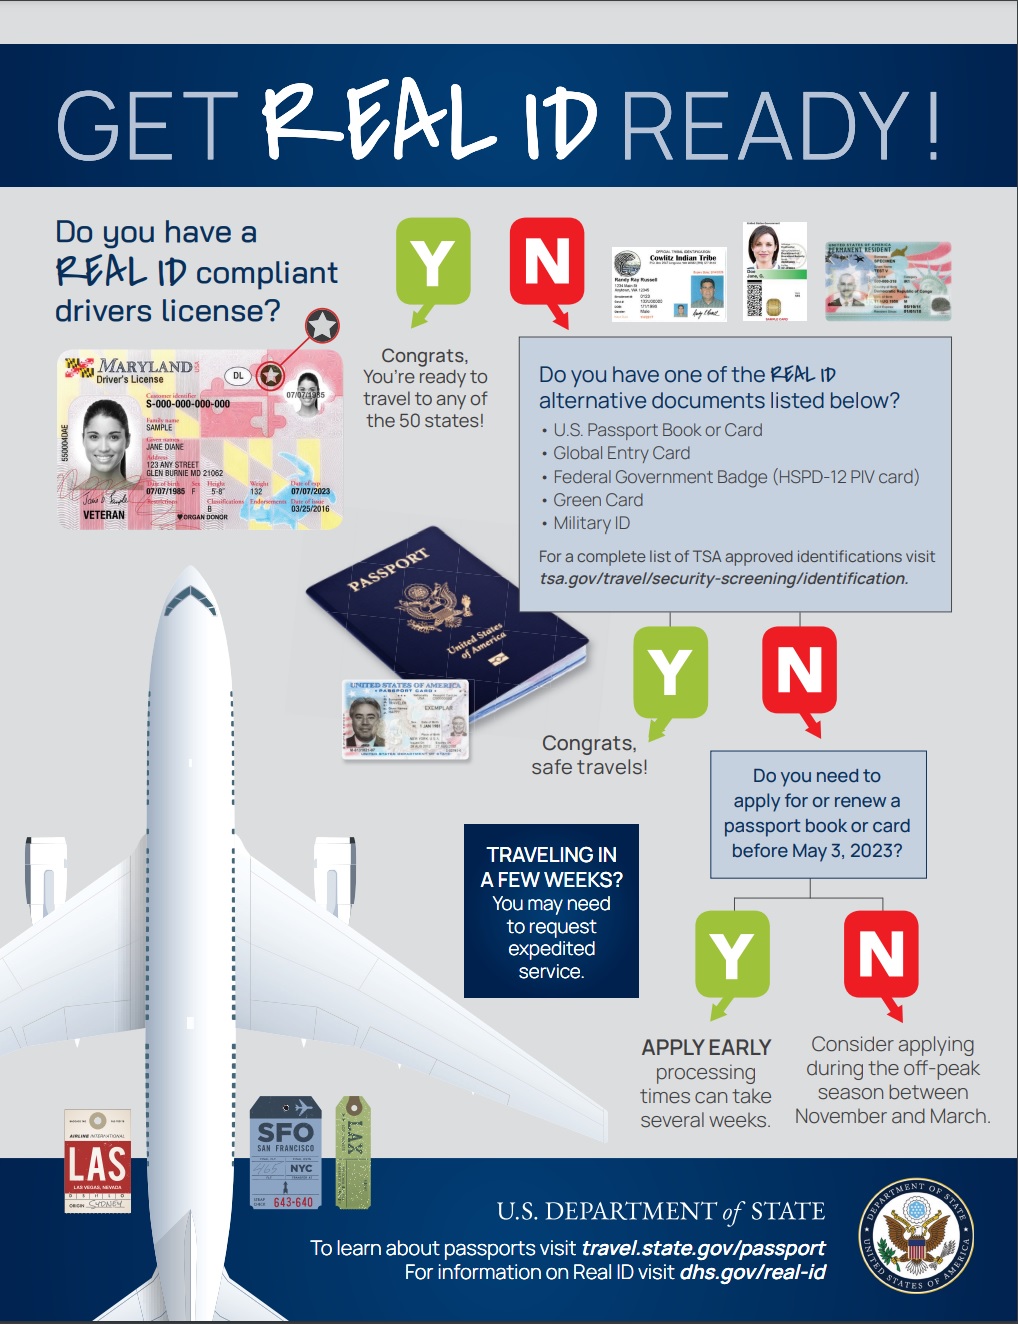 If you want to be one of the travelers out there and not sure if you have the correct identification, you're not alone. Learn about Real ID.